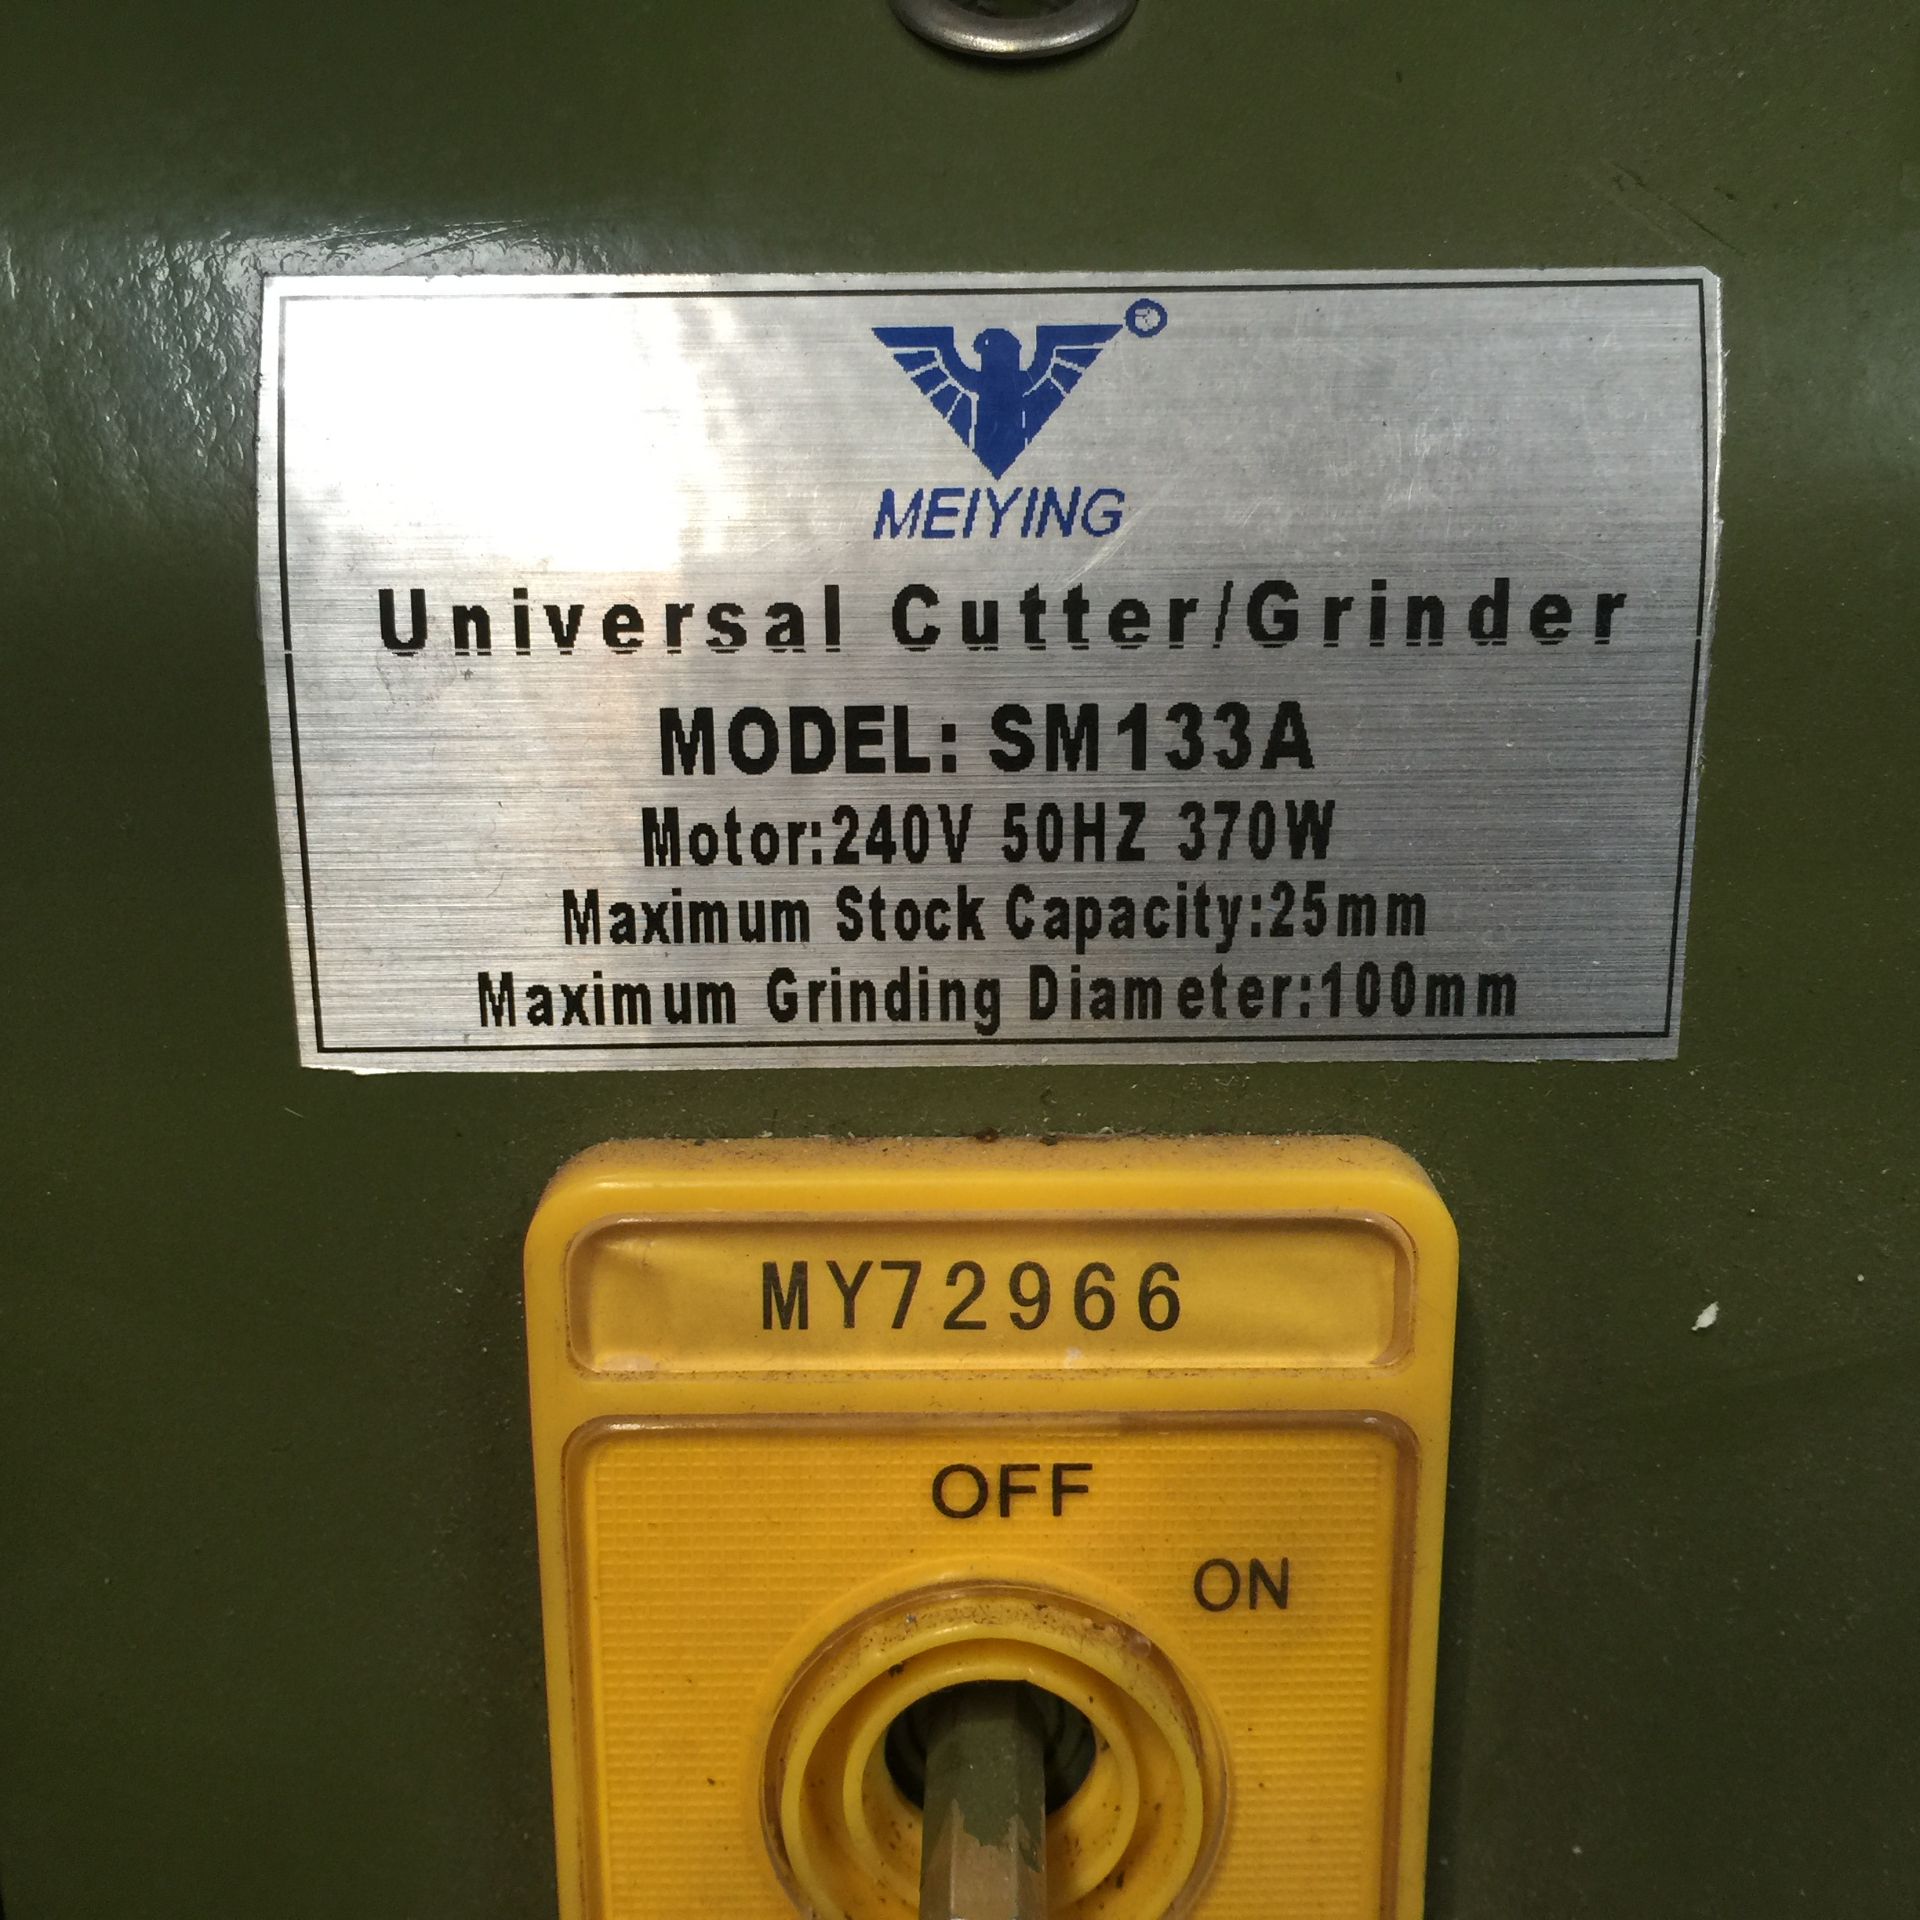 MEIYING - UNIVERSAL CUTTER GRINDER, SM133A - Image 2 of 2